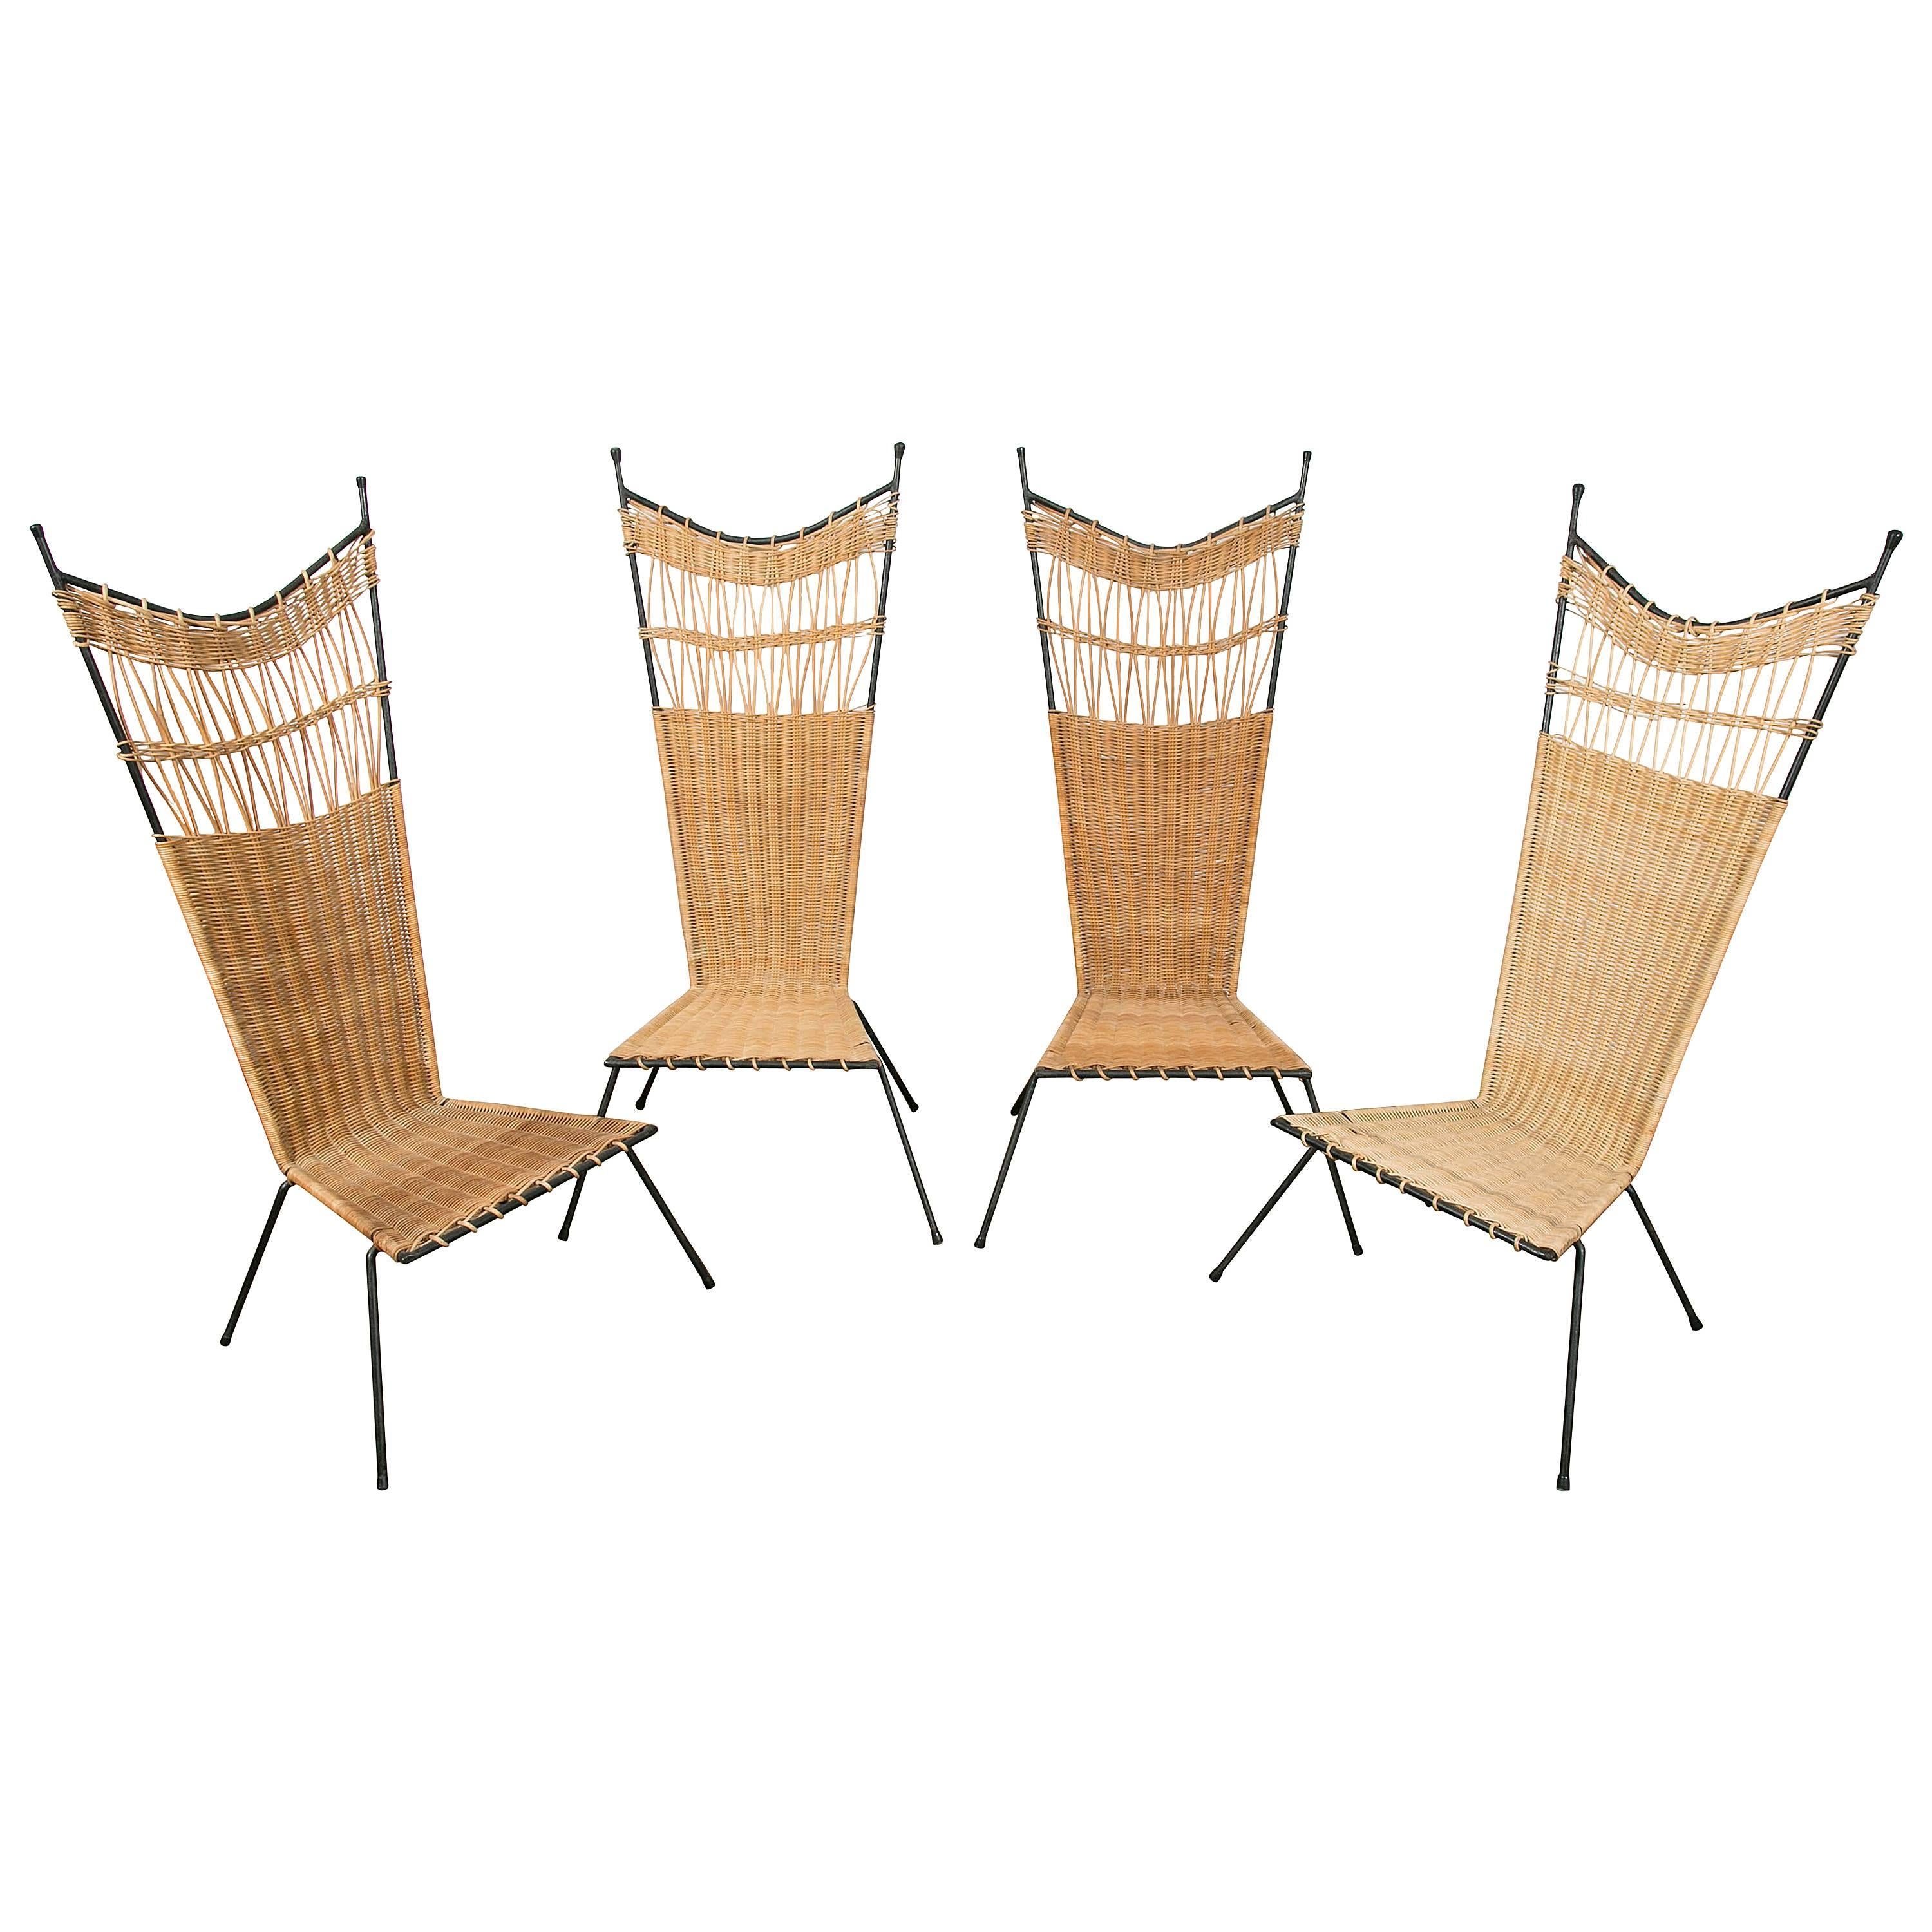 Set of Four Metal and Wicker Slipper Chairs by Raoul Guys, France, 1950